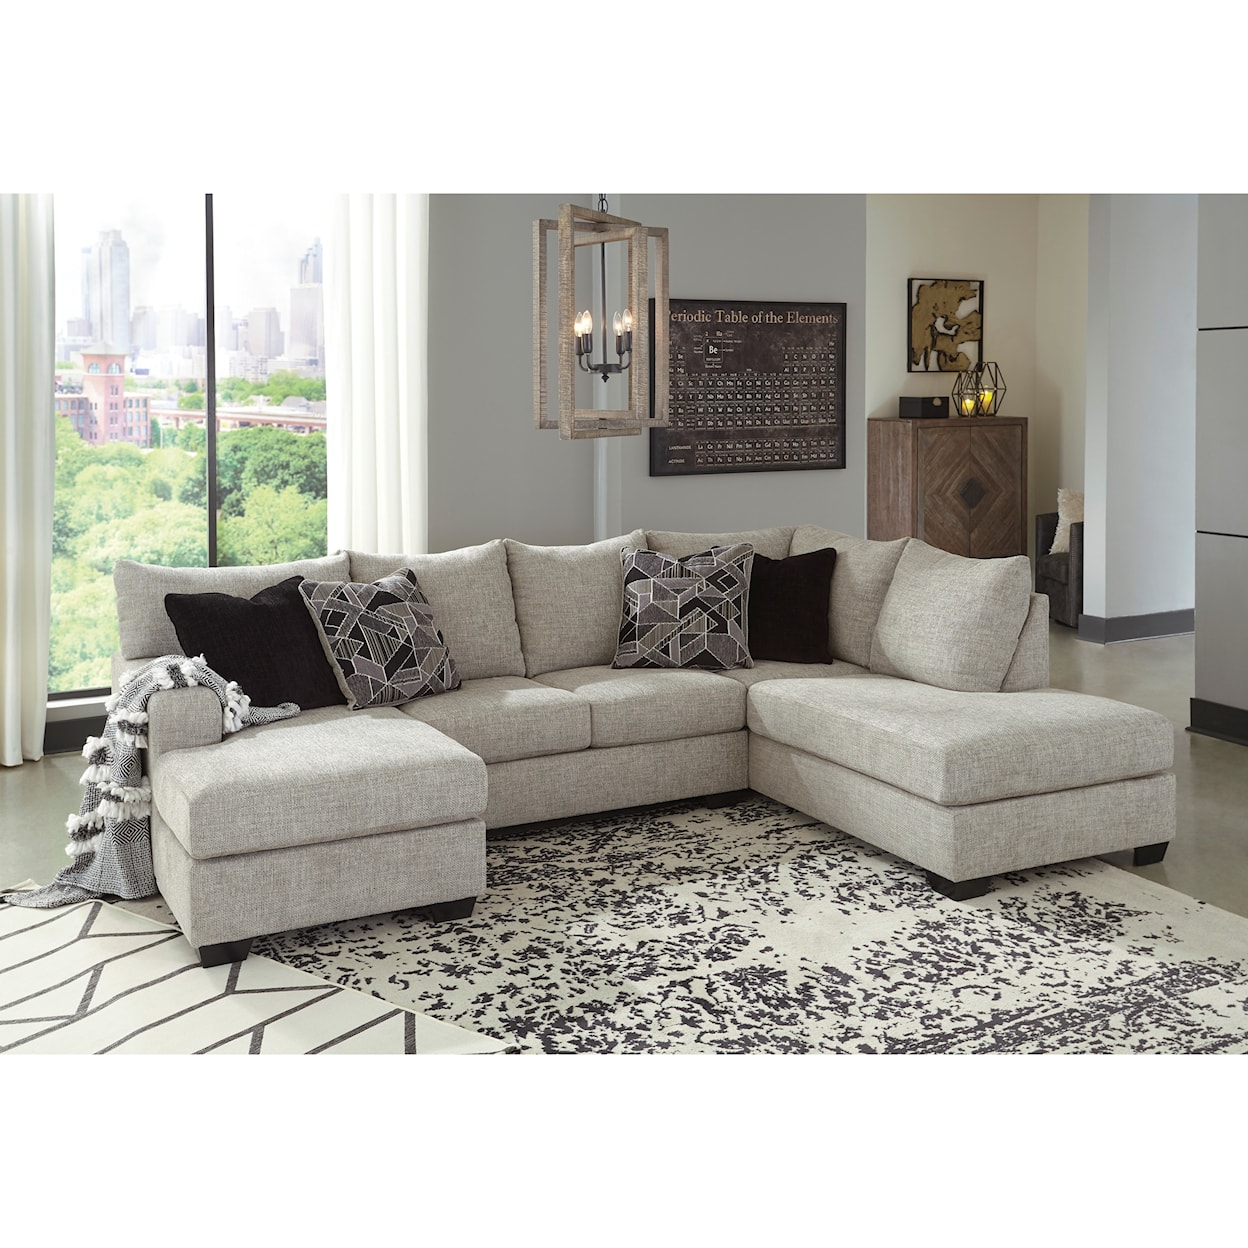 Benchcraft Miley Sectional